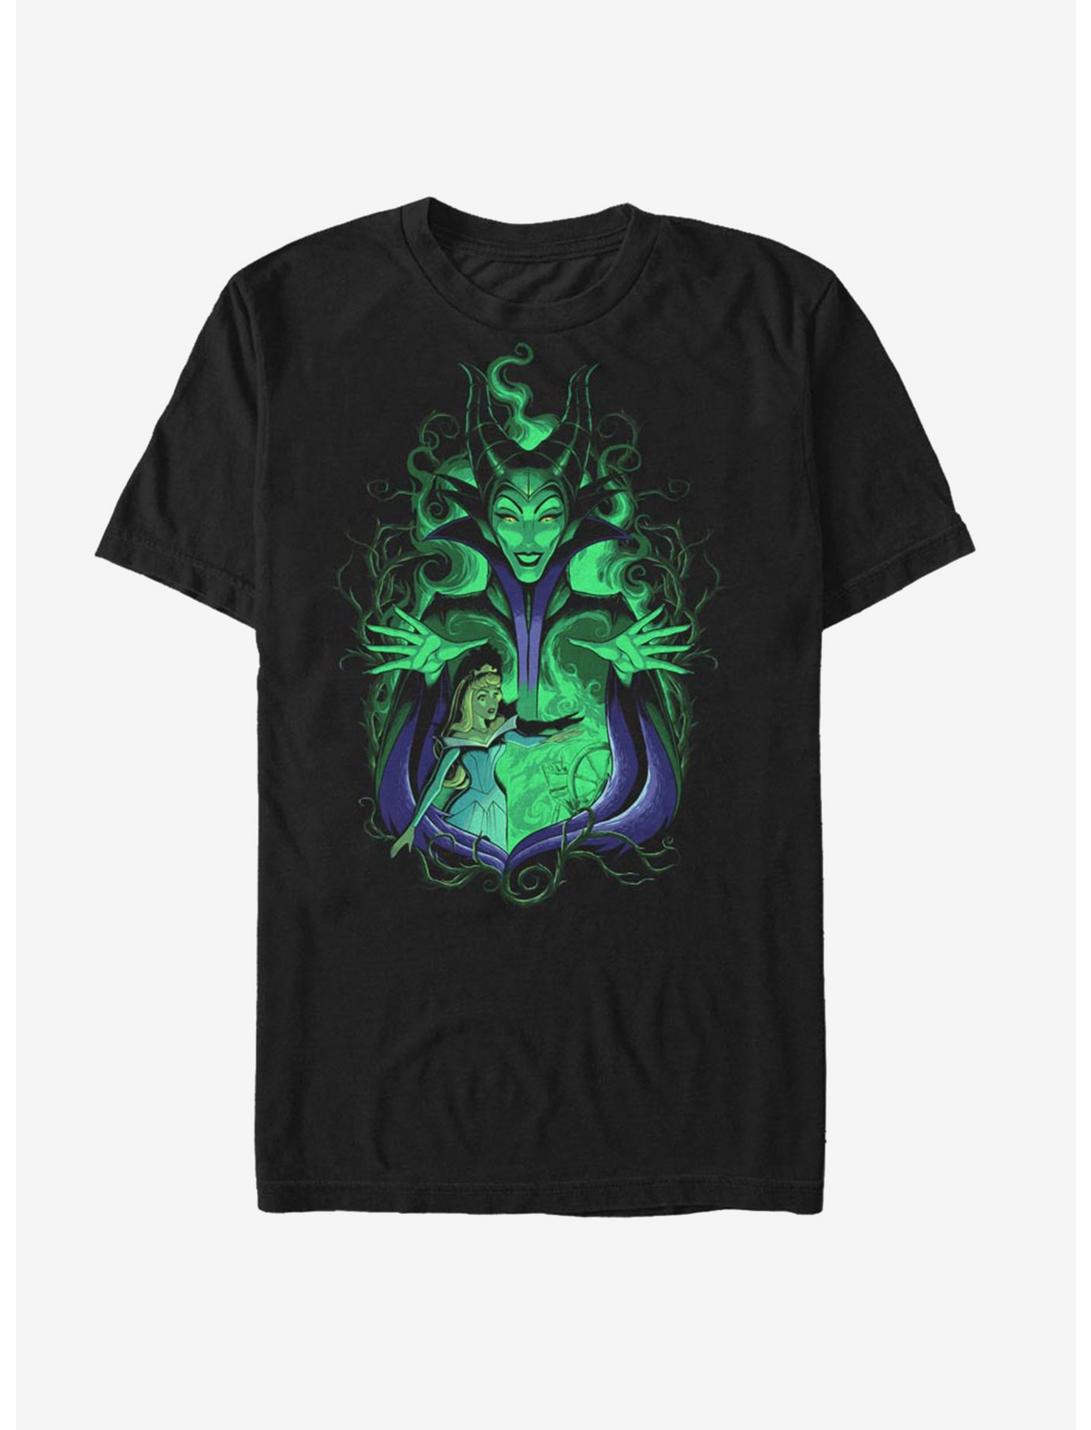 Disney Sleeping Beauty Maleficent Touch The Spindle T-Shirt, BLACK, hi-res